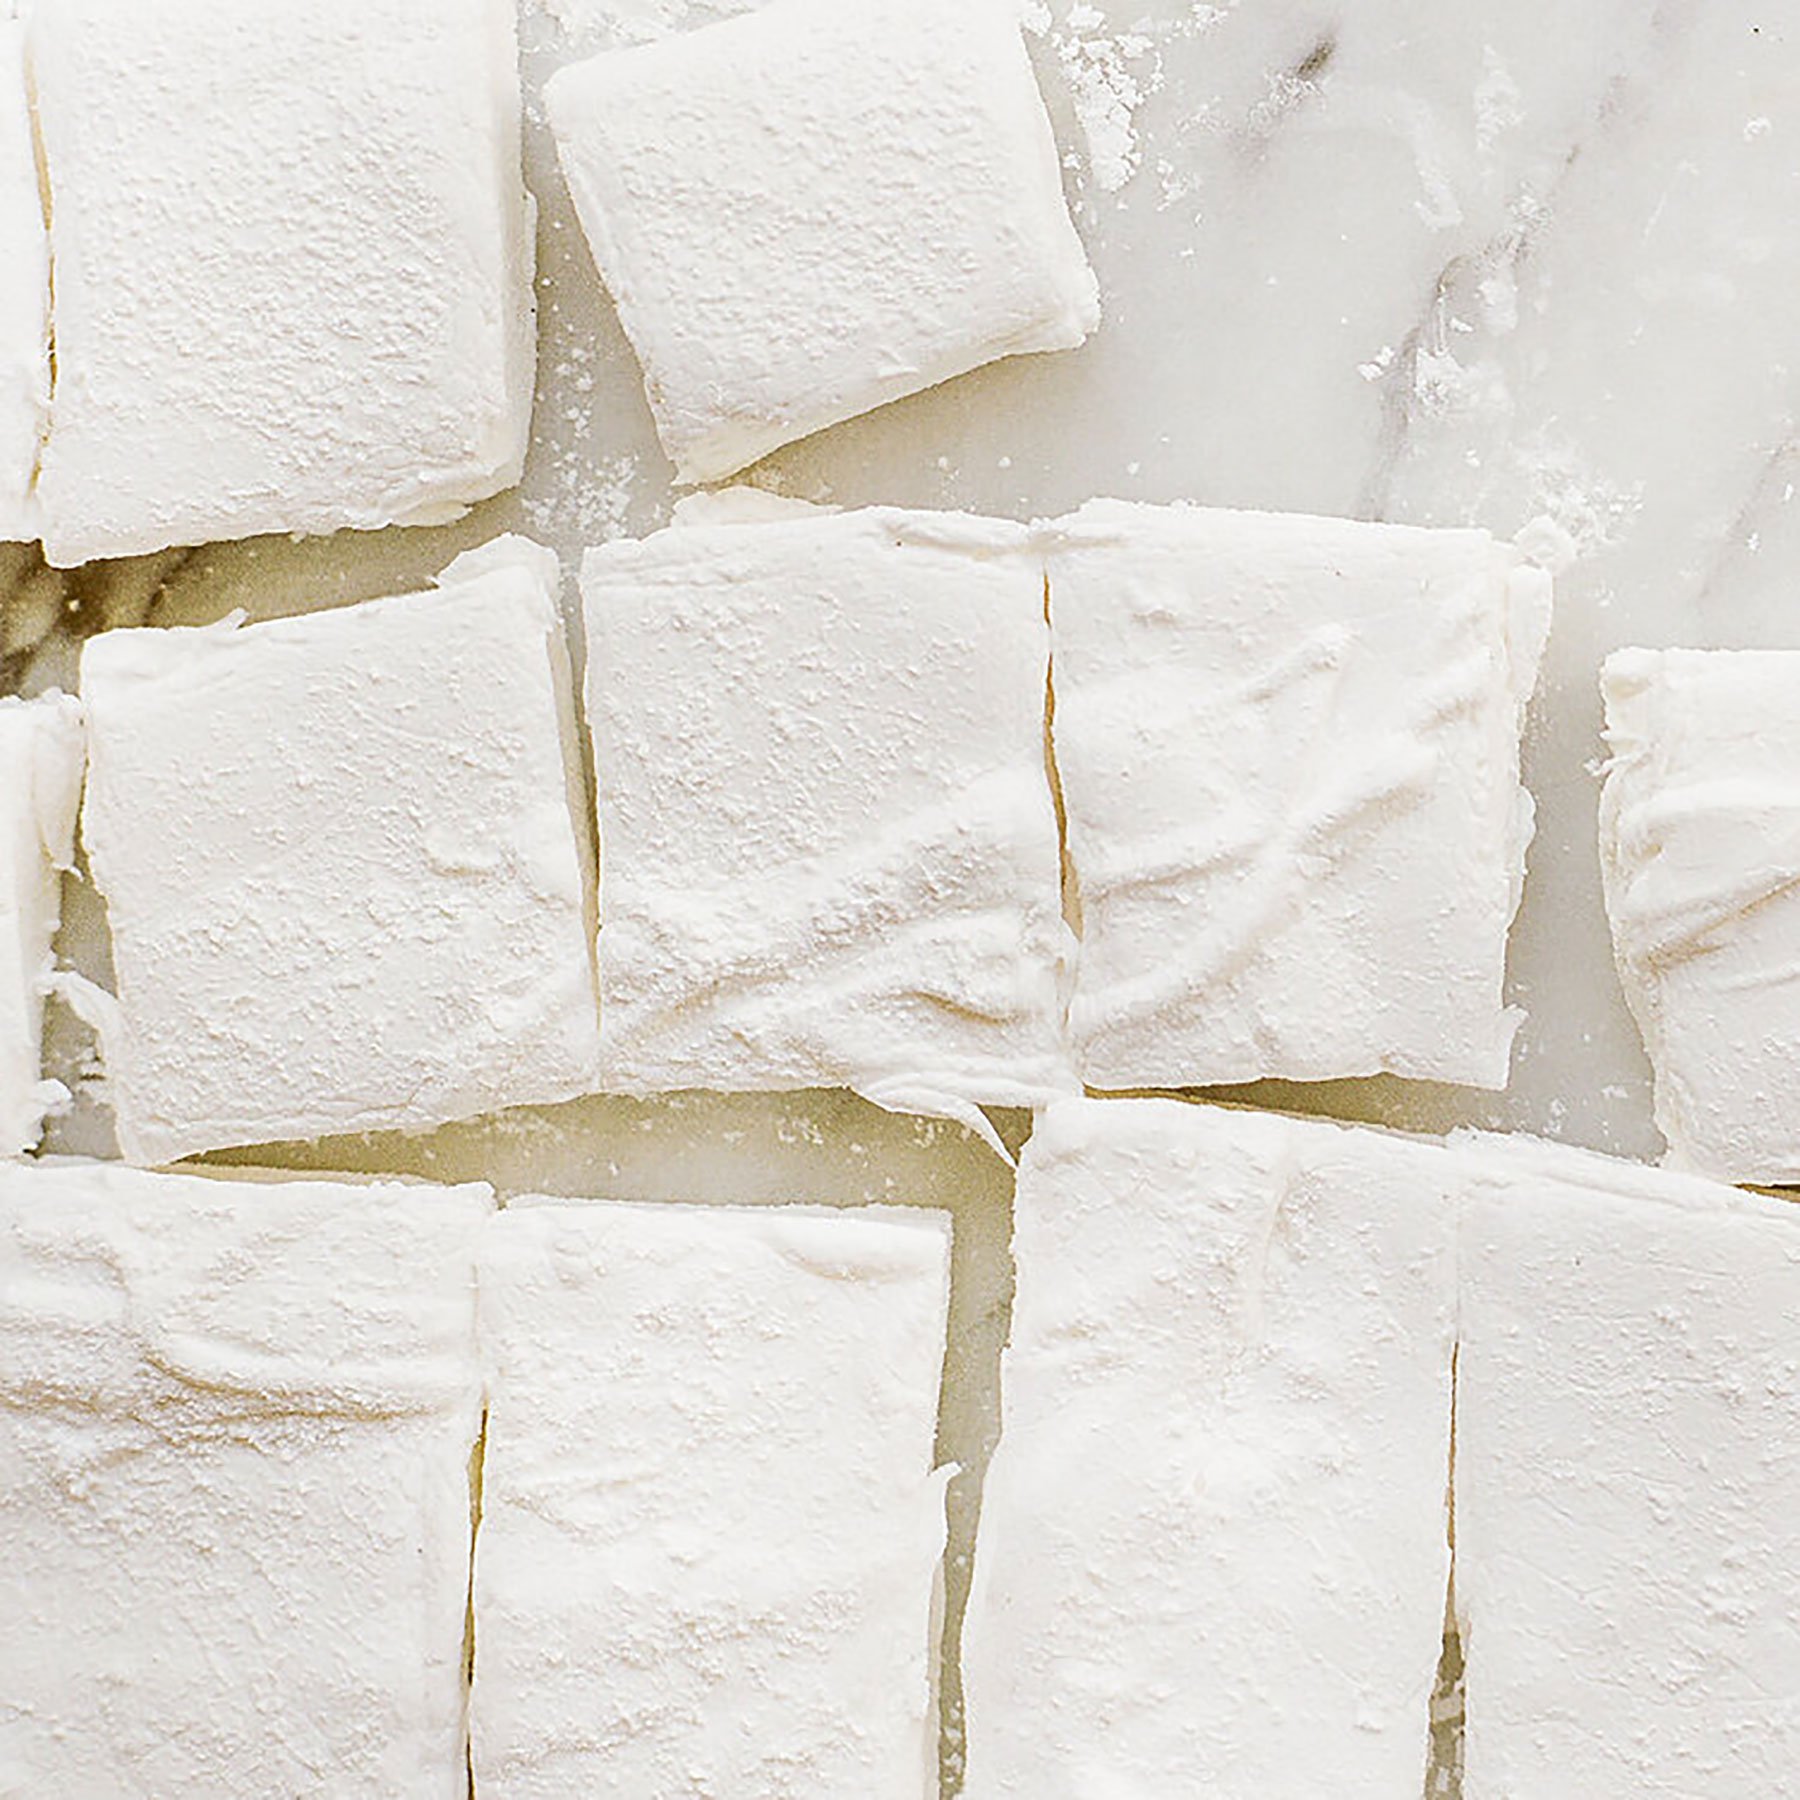 How to Make Marshmallows